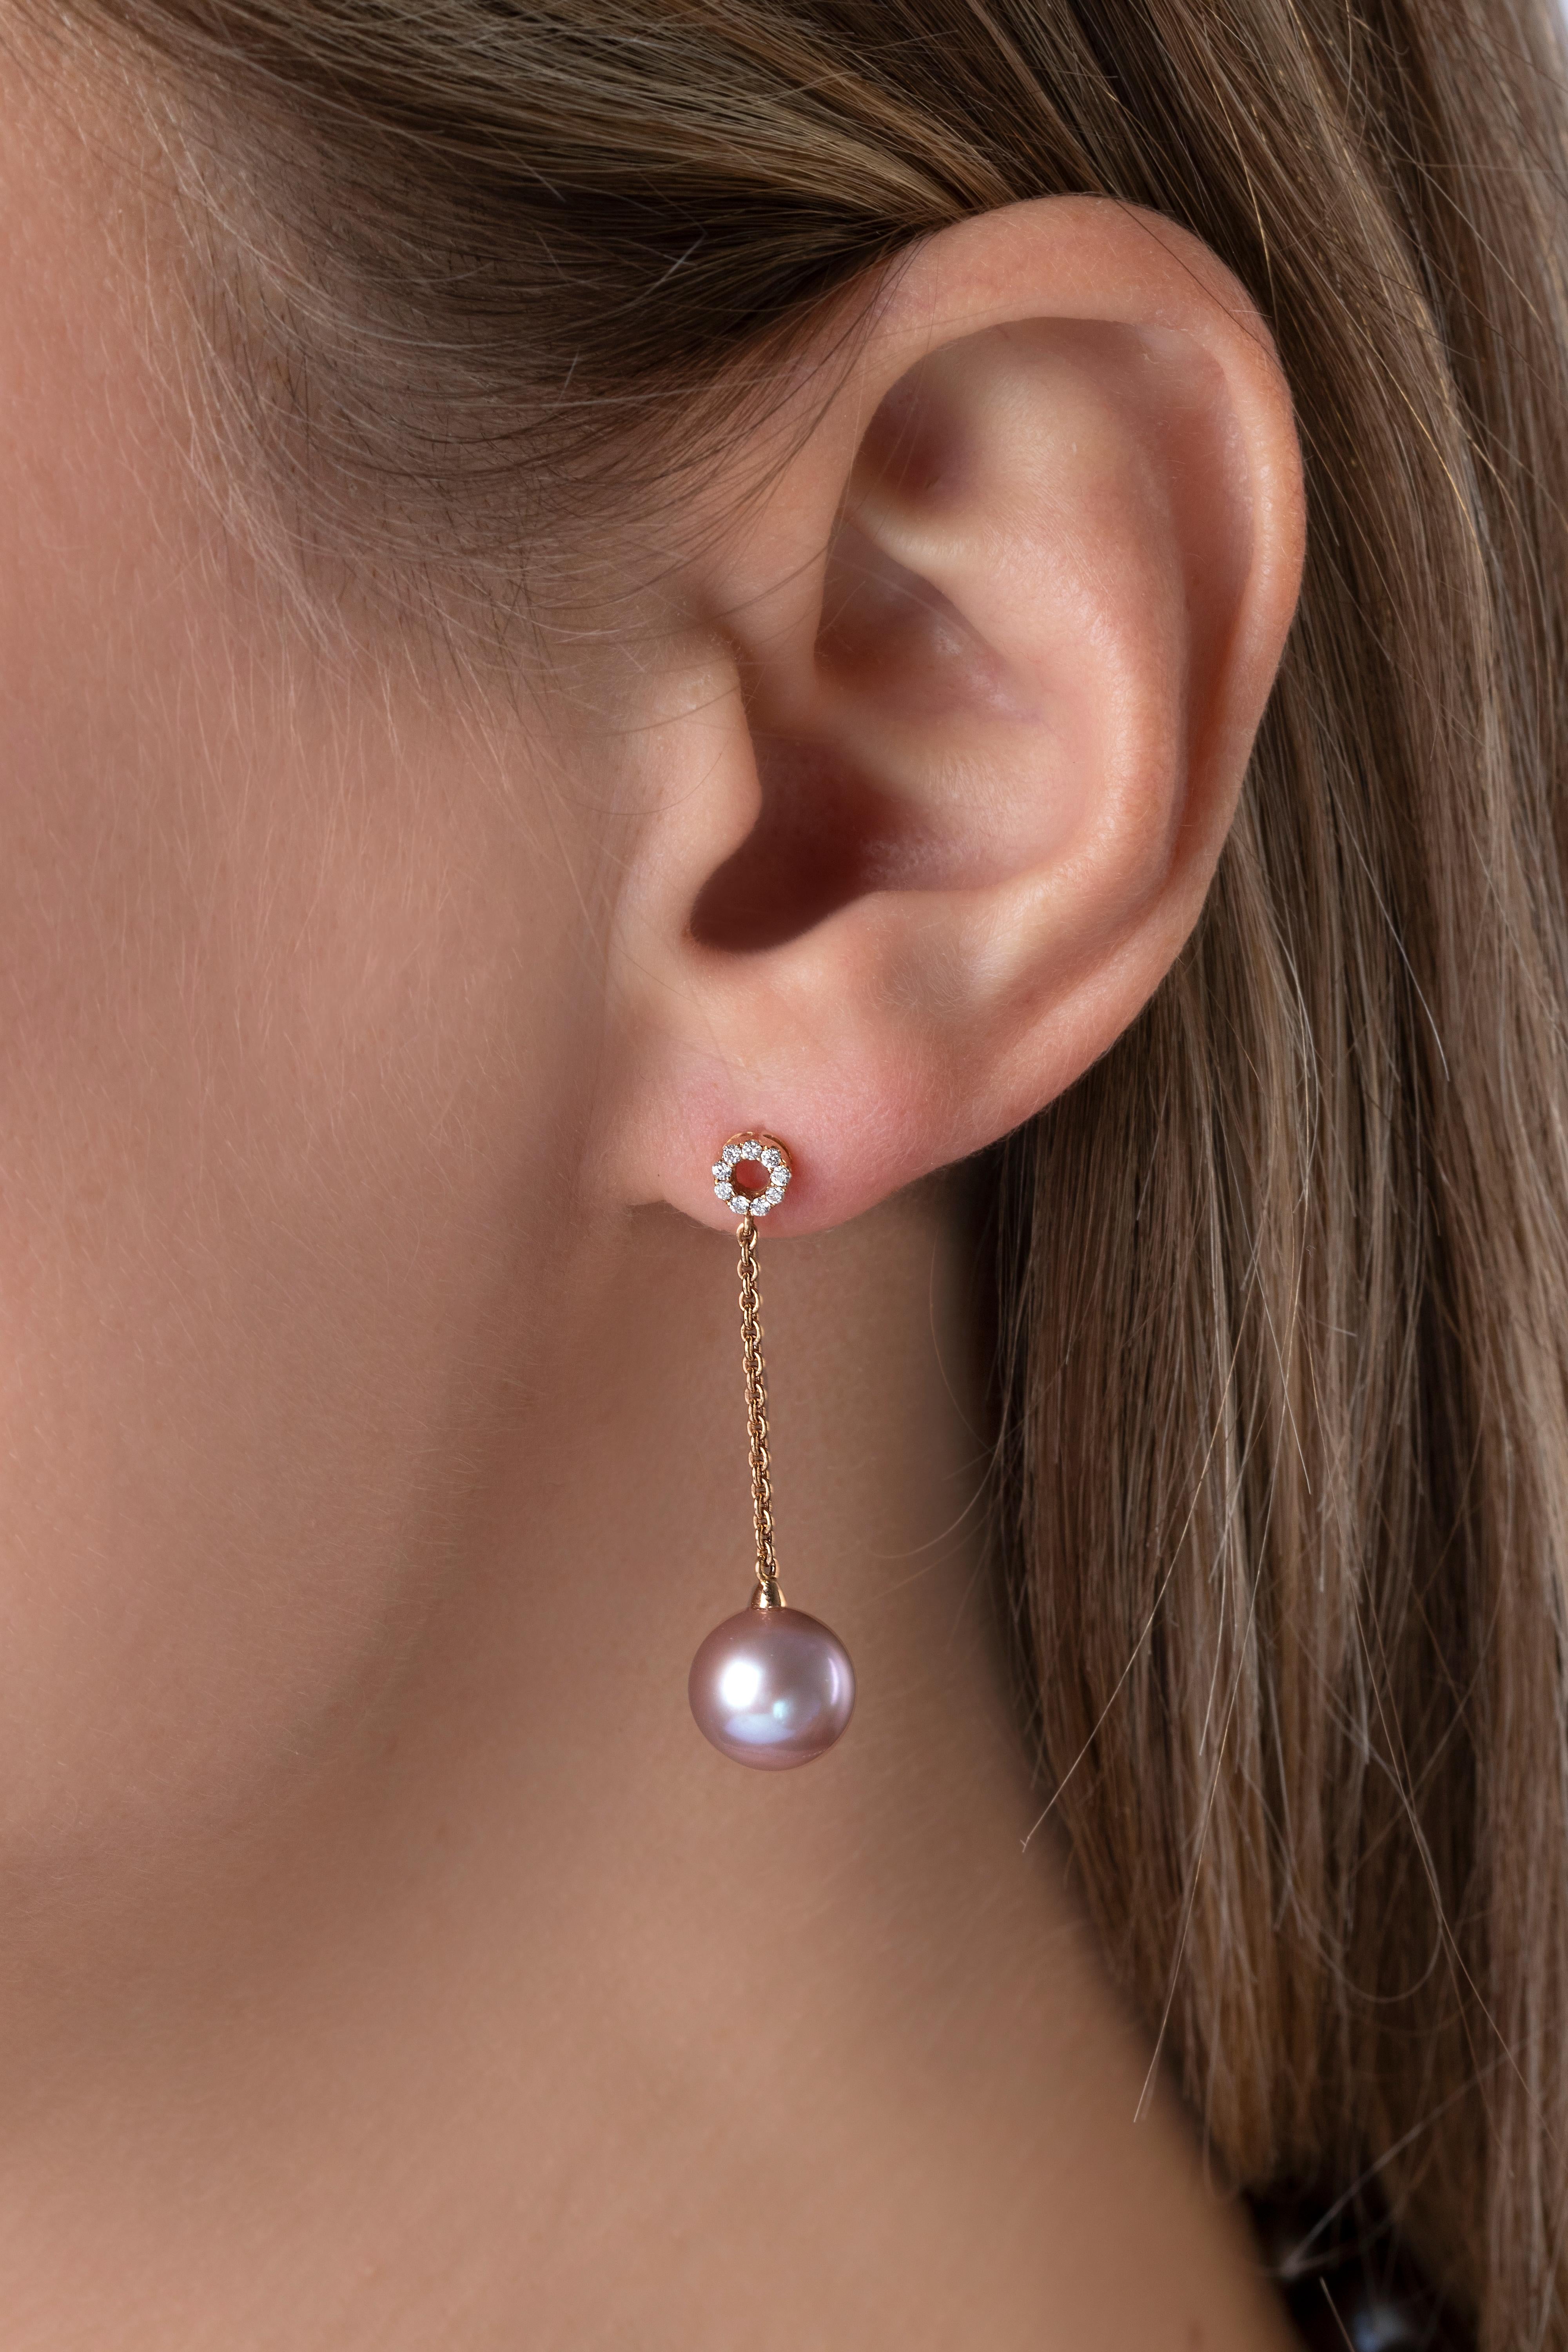 These one of a kind earrings by Yoko London feature spectacular natural colour Freshwater pearls beneath a contemporary rose gold chain and circle diamond motif. Striking, yet delicate these unique earrings have been expertly designed to move with